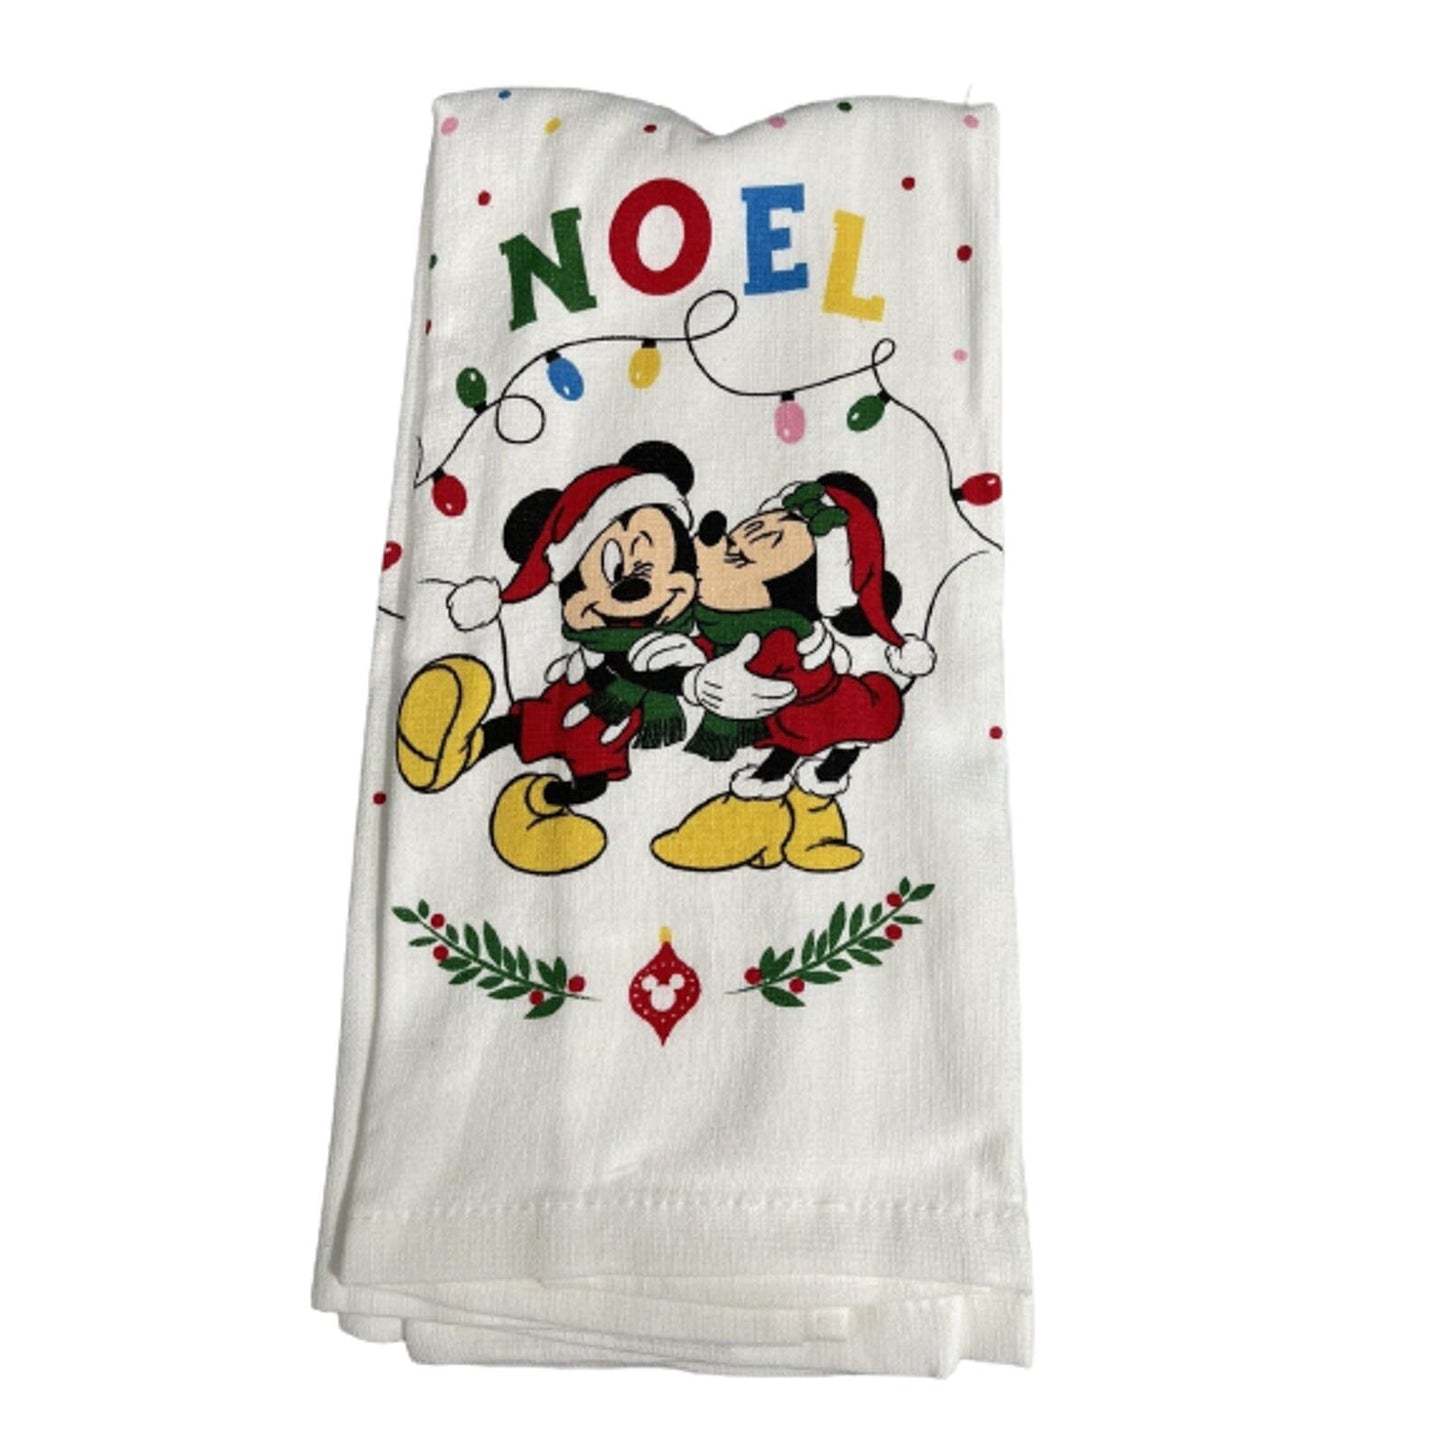 Disney Christmas Kitchen Towels - Set of 2 with Mickey & Minnie Noel 16 x 26 NEW